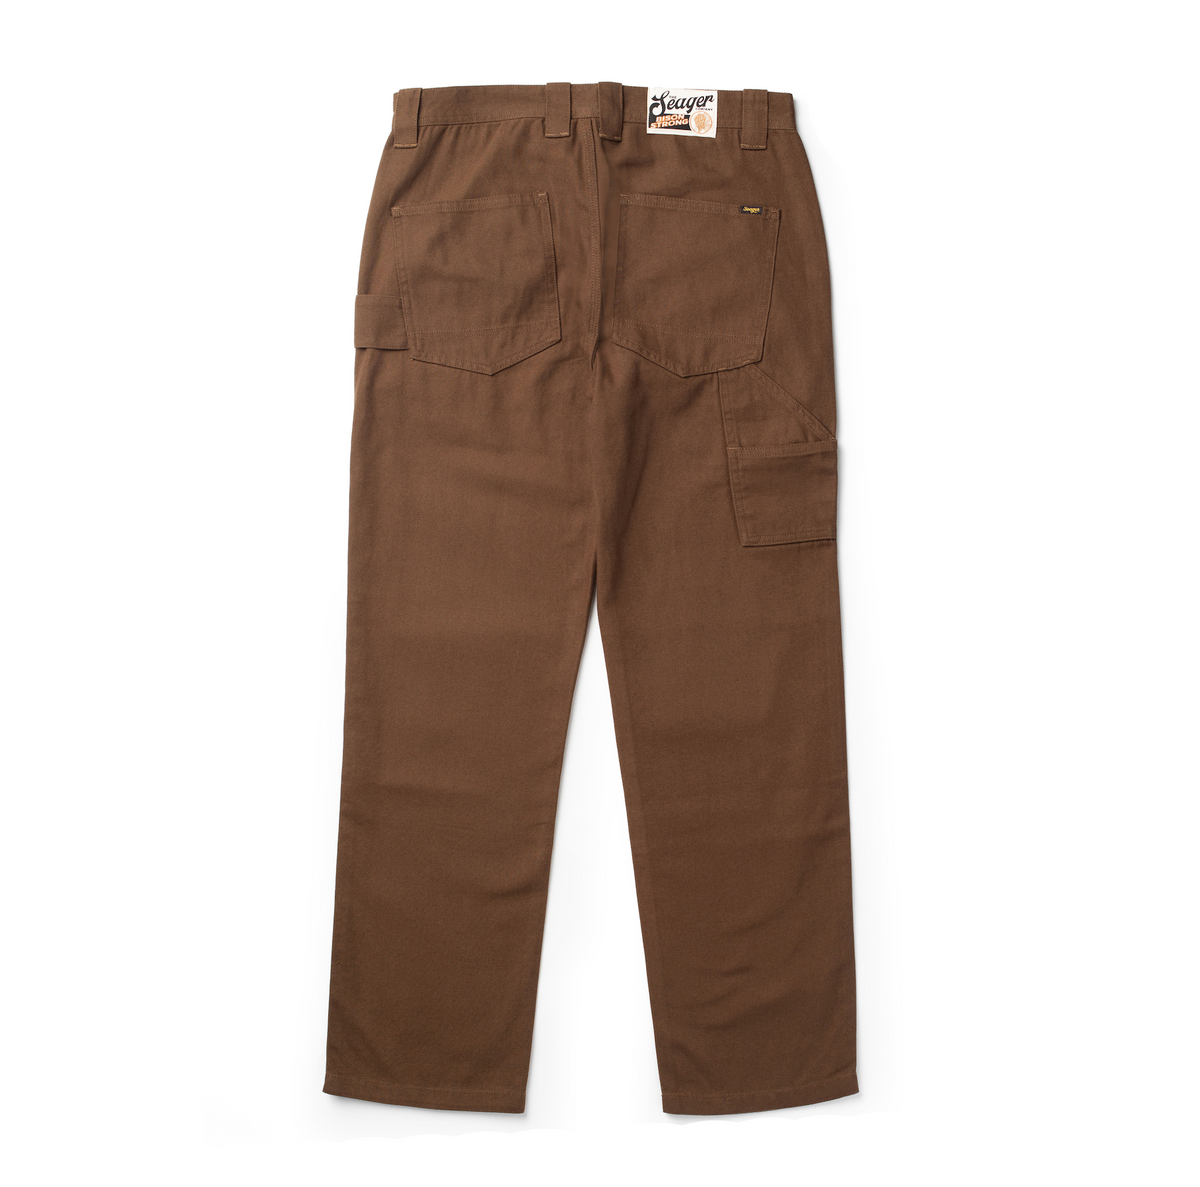 Bison Canvas Pant Regular Fit Tobacco | Seager Co.